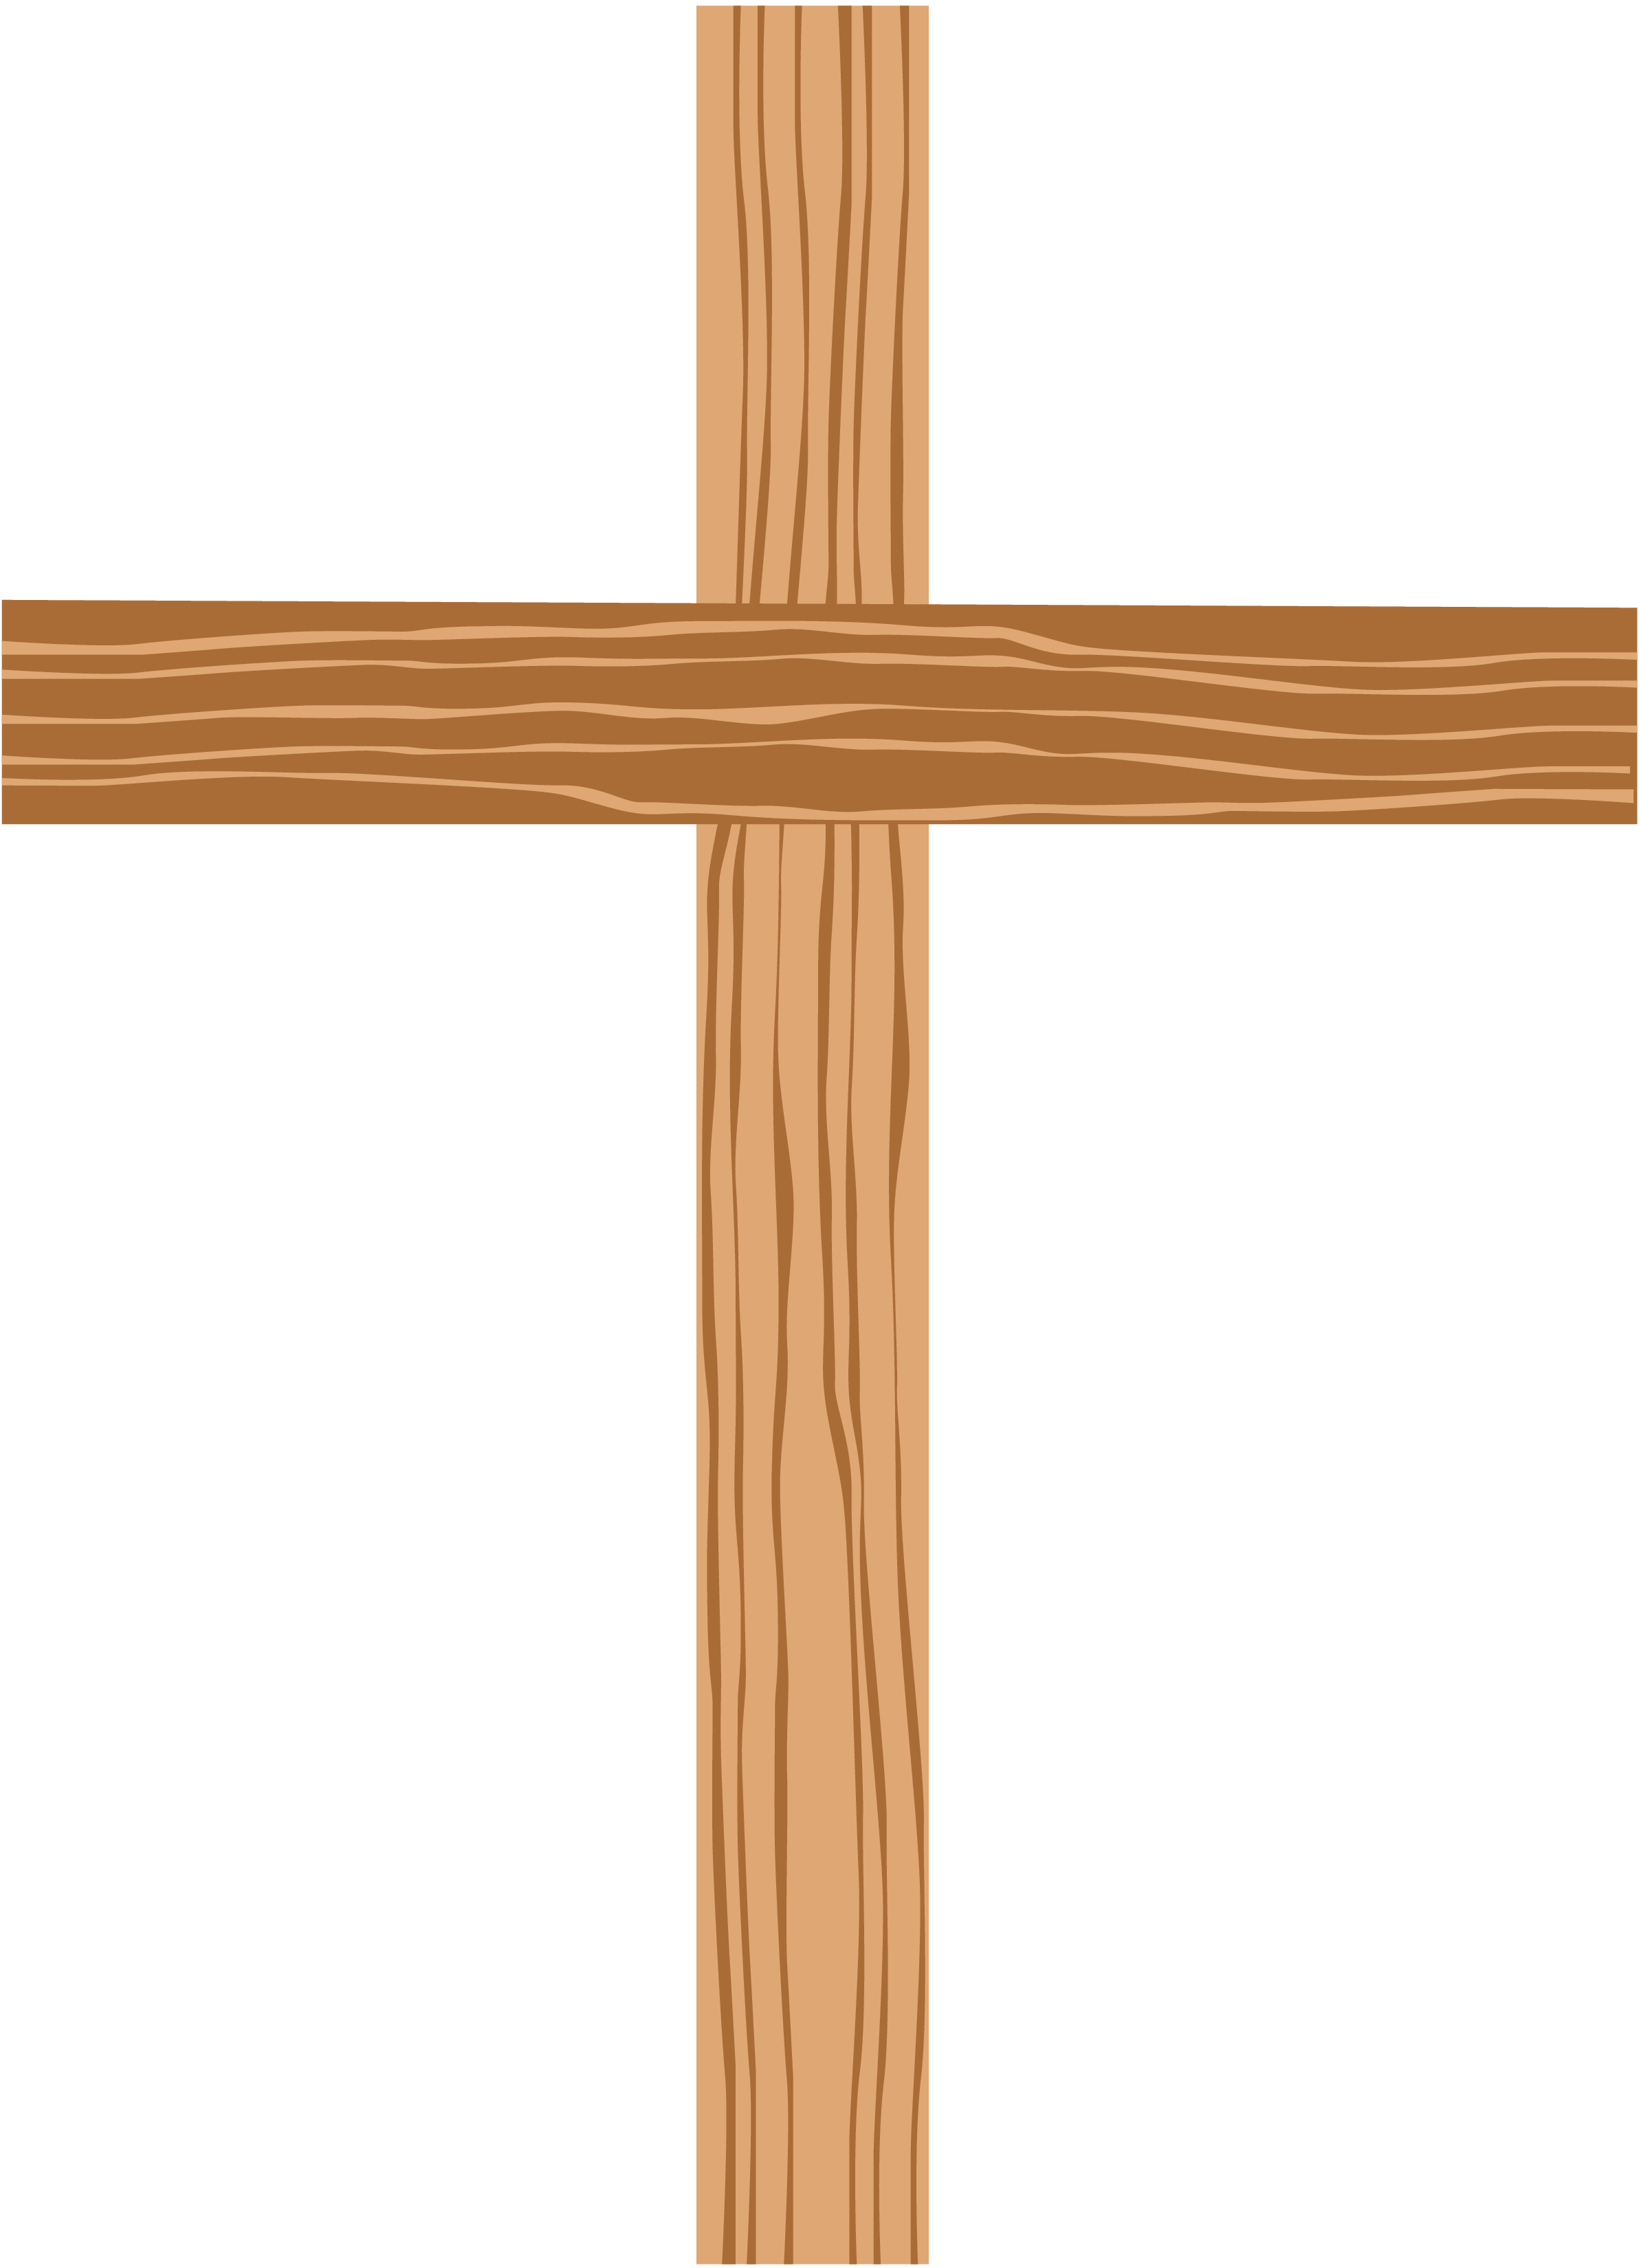 Wood cross png #25650 - Free Icons and PNG Backgrounds